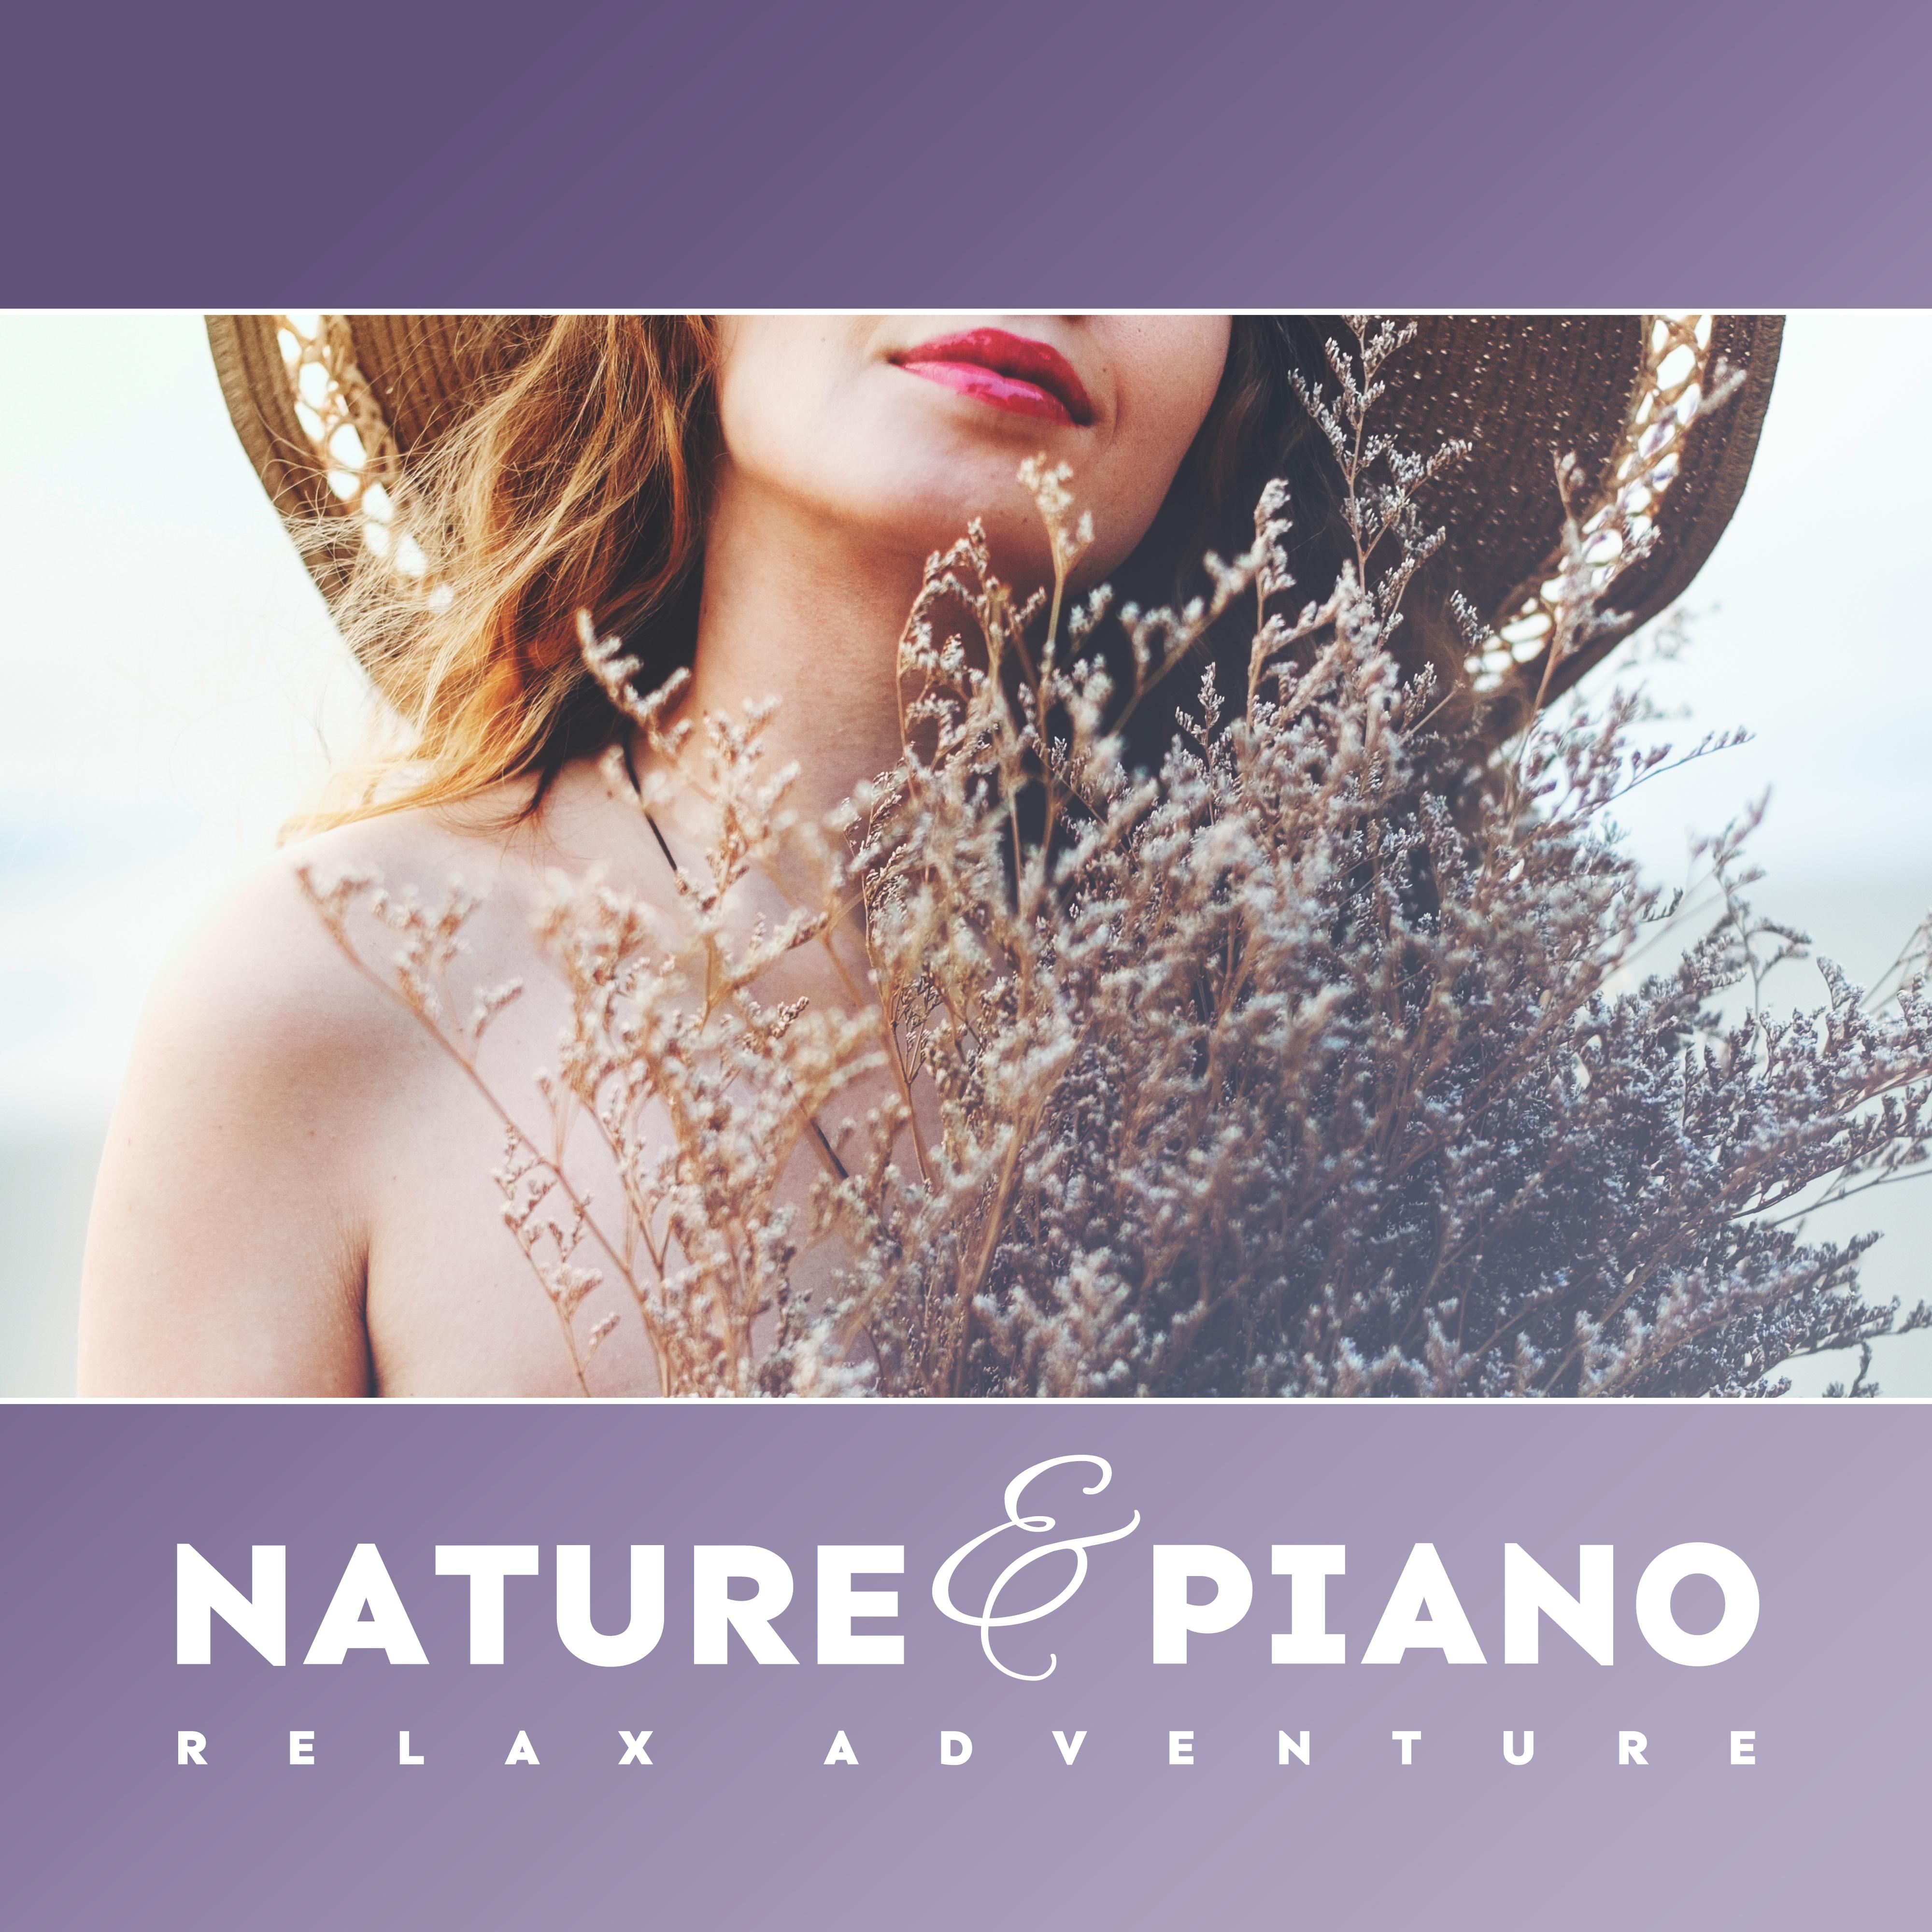 Nature & Piano Relax Adventure: 2019 New Age Nature Music for Total Relax, De-stress, Calm & Rest, The Best Album for Lovers of Birds Singing, Water Sounds and Melodies Played on the Piano